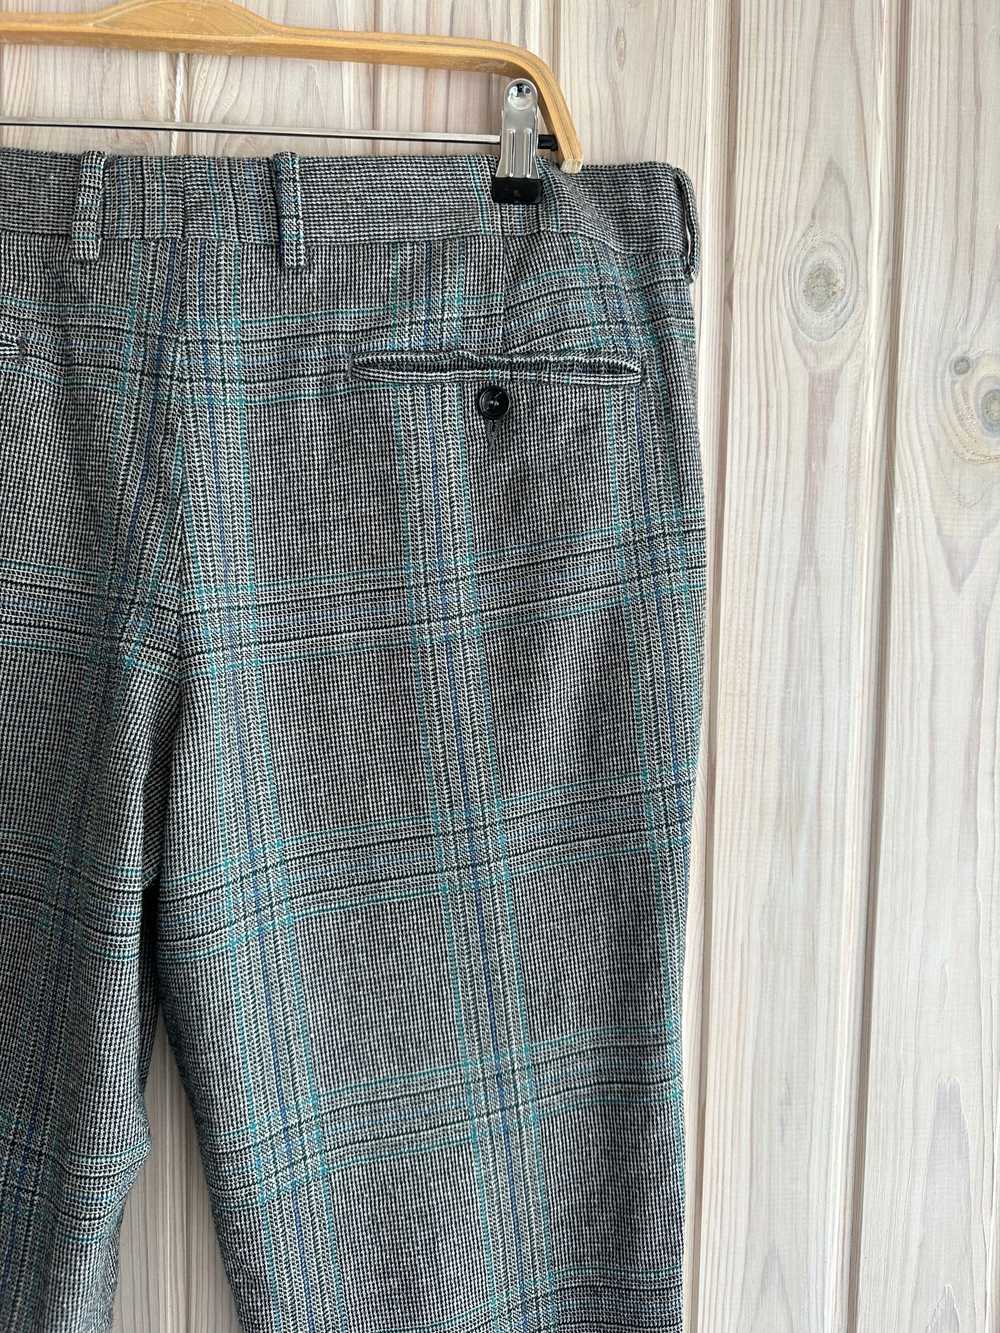 Gucci GUCCI Wool Mohair Plaid Check Trousers - image 10